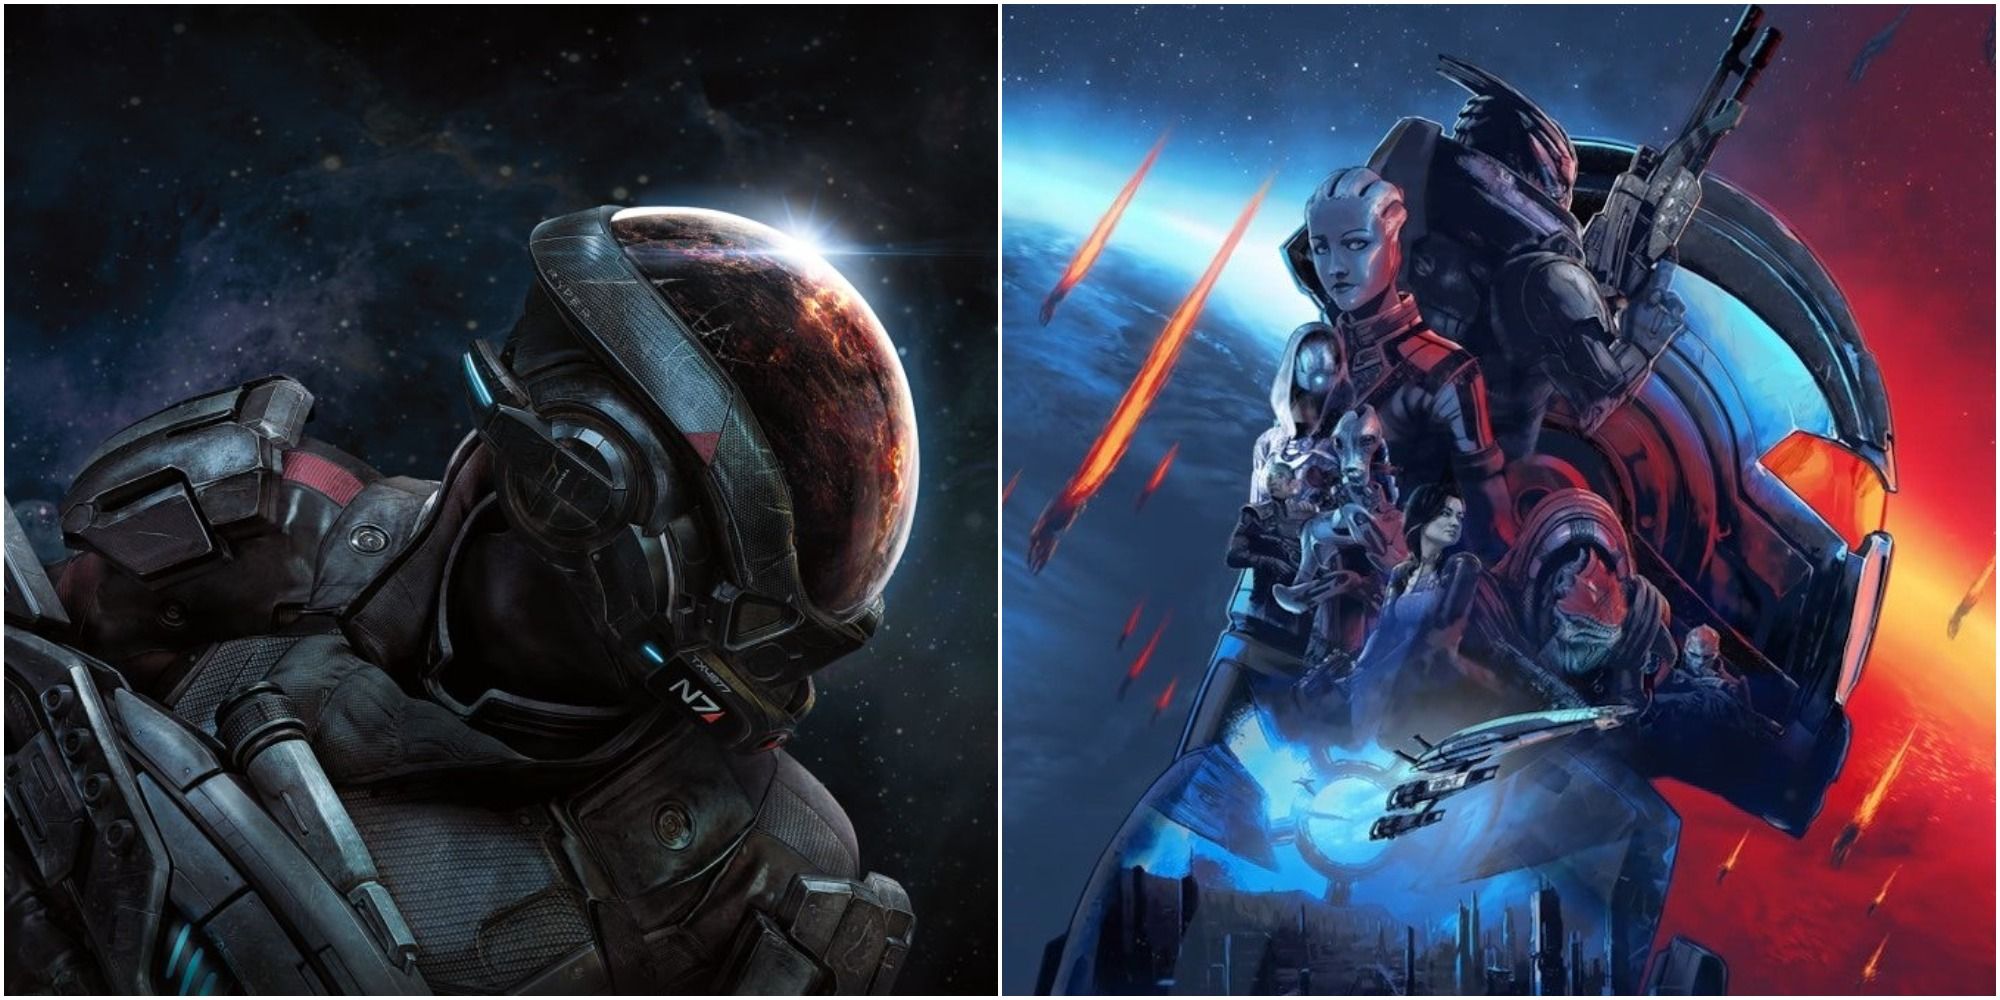 Cover art for Mass Effect Andromeda (left) and Mass Effect: Legendary Edition (right)